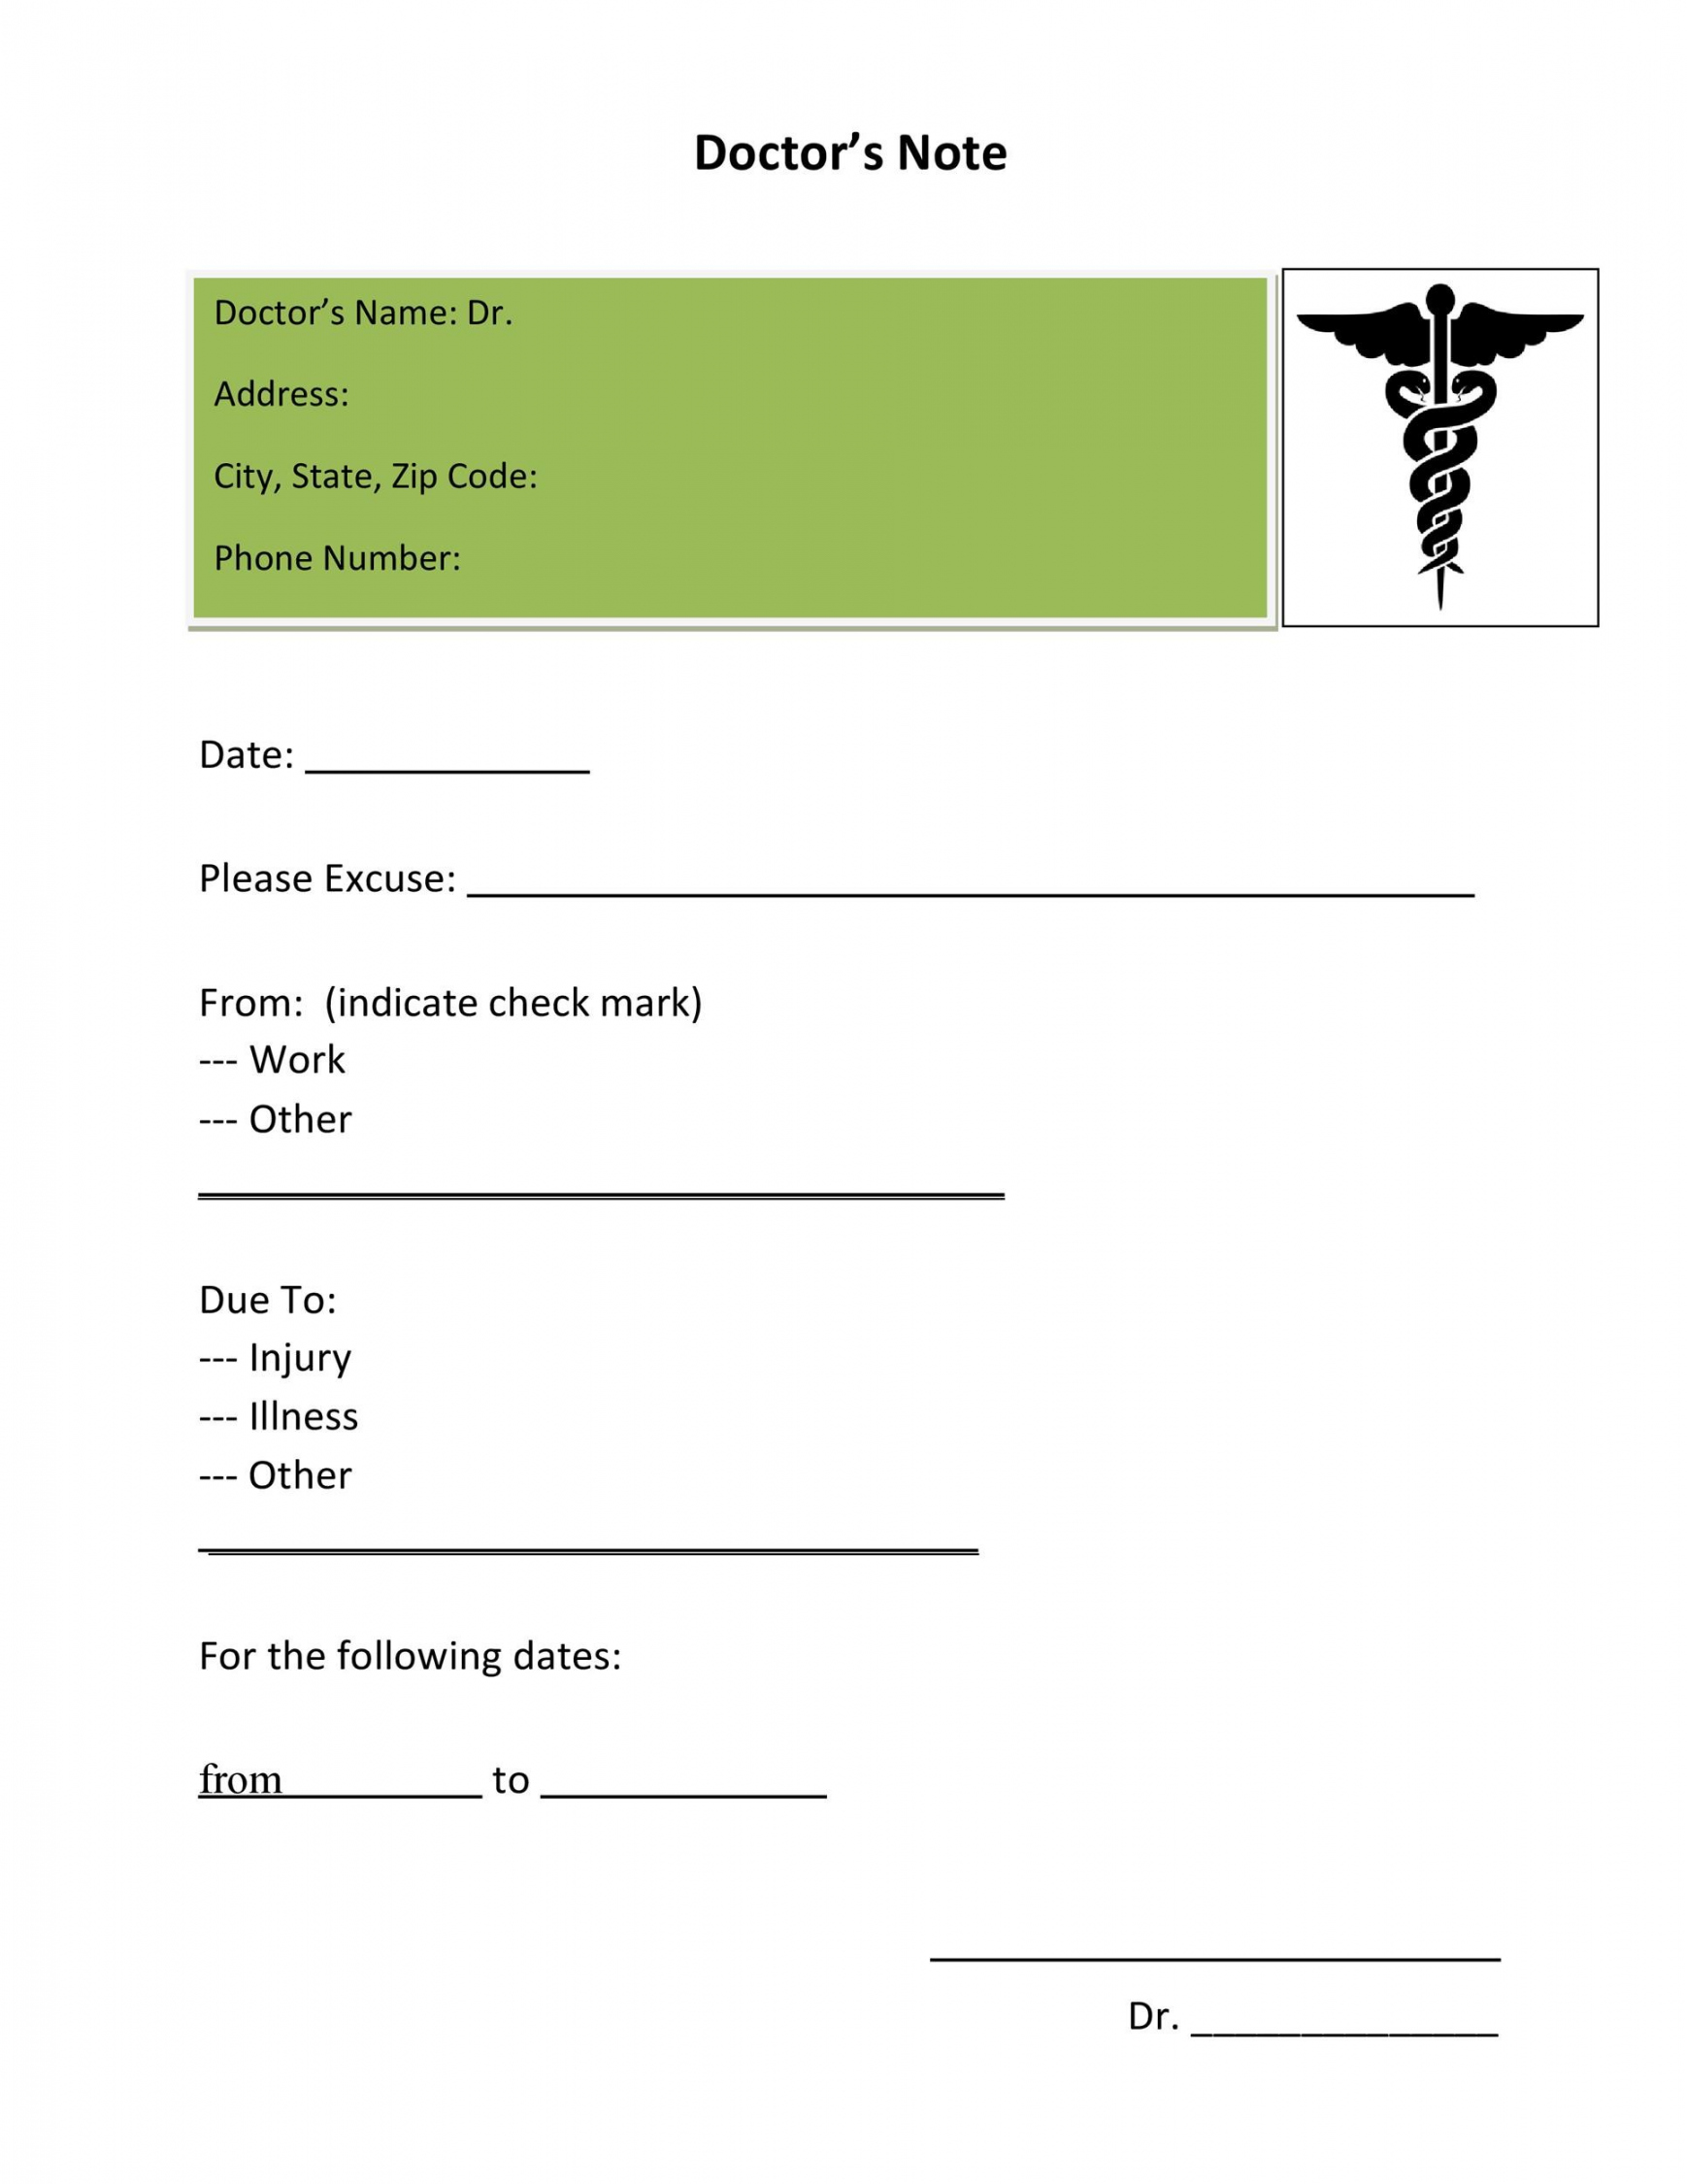 Free.Printable Fake Doctors Note With Signature - Printable -  Free Doctor Note Templates [for Work or School]